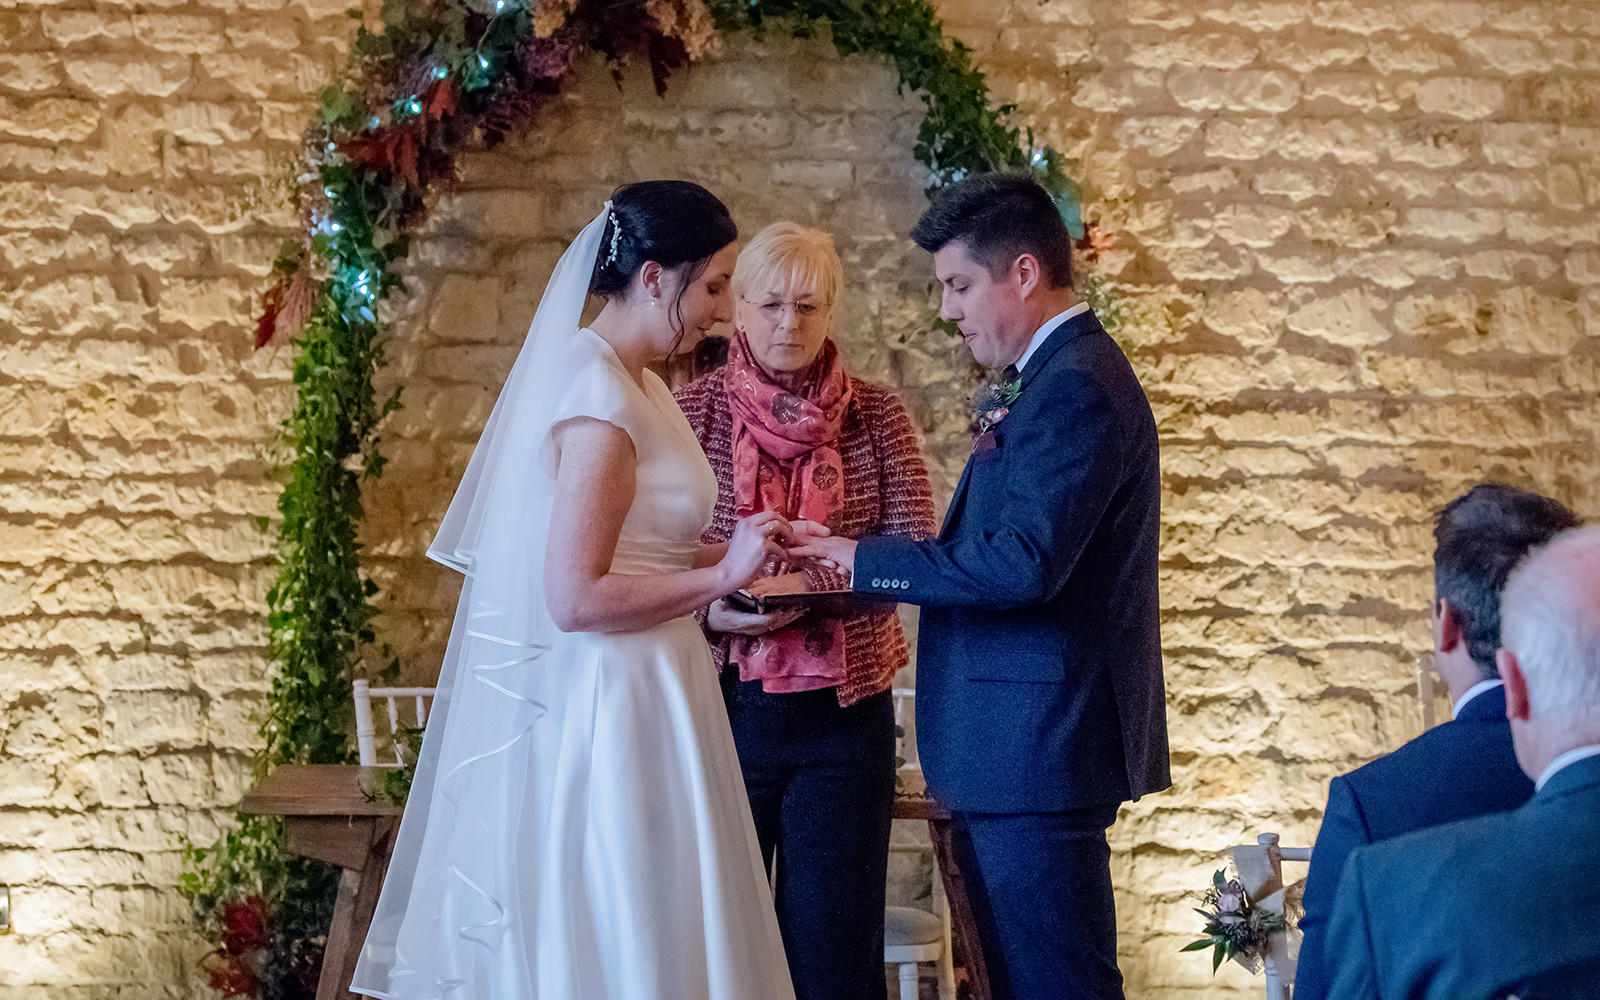 Capture Every Moment wedding photography duo from Cirencester reportage traditional photographers Lapstone Barn Chipping Campden Cotswolds venue Bride Groom exchange rings